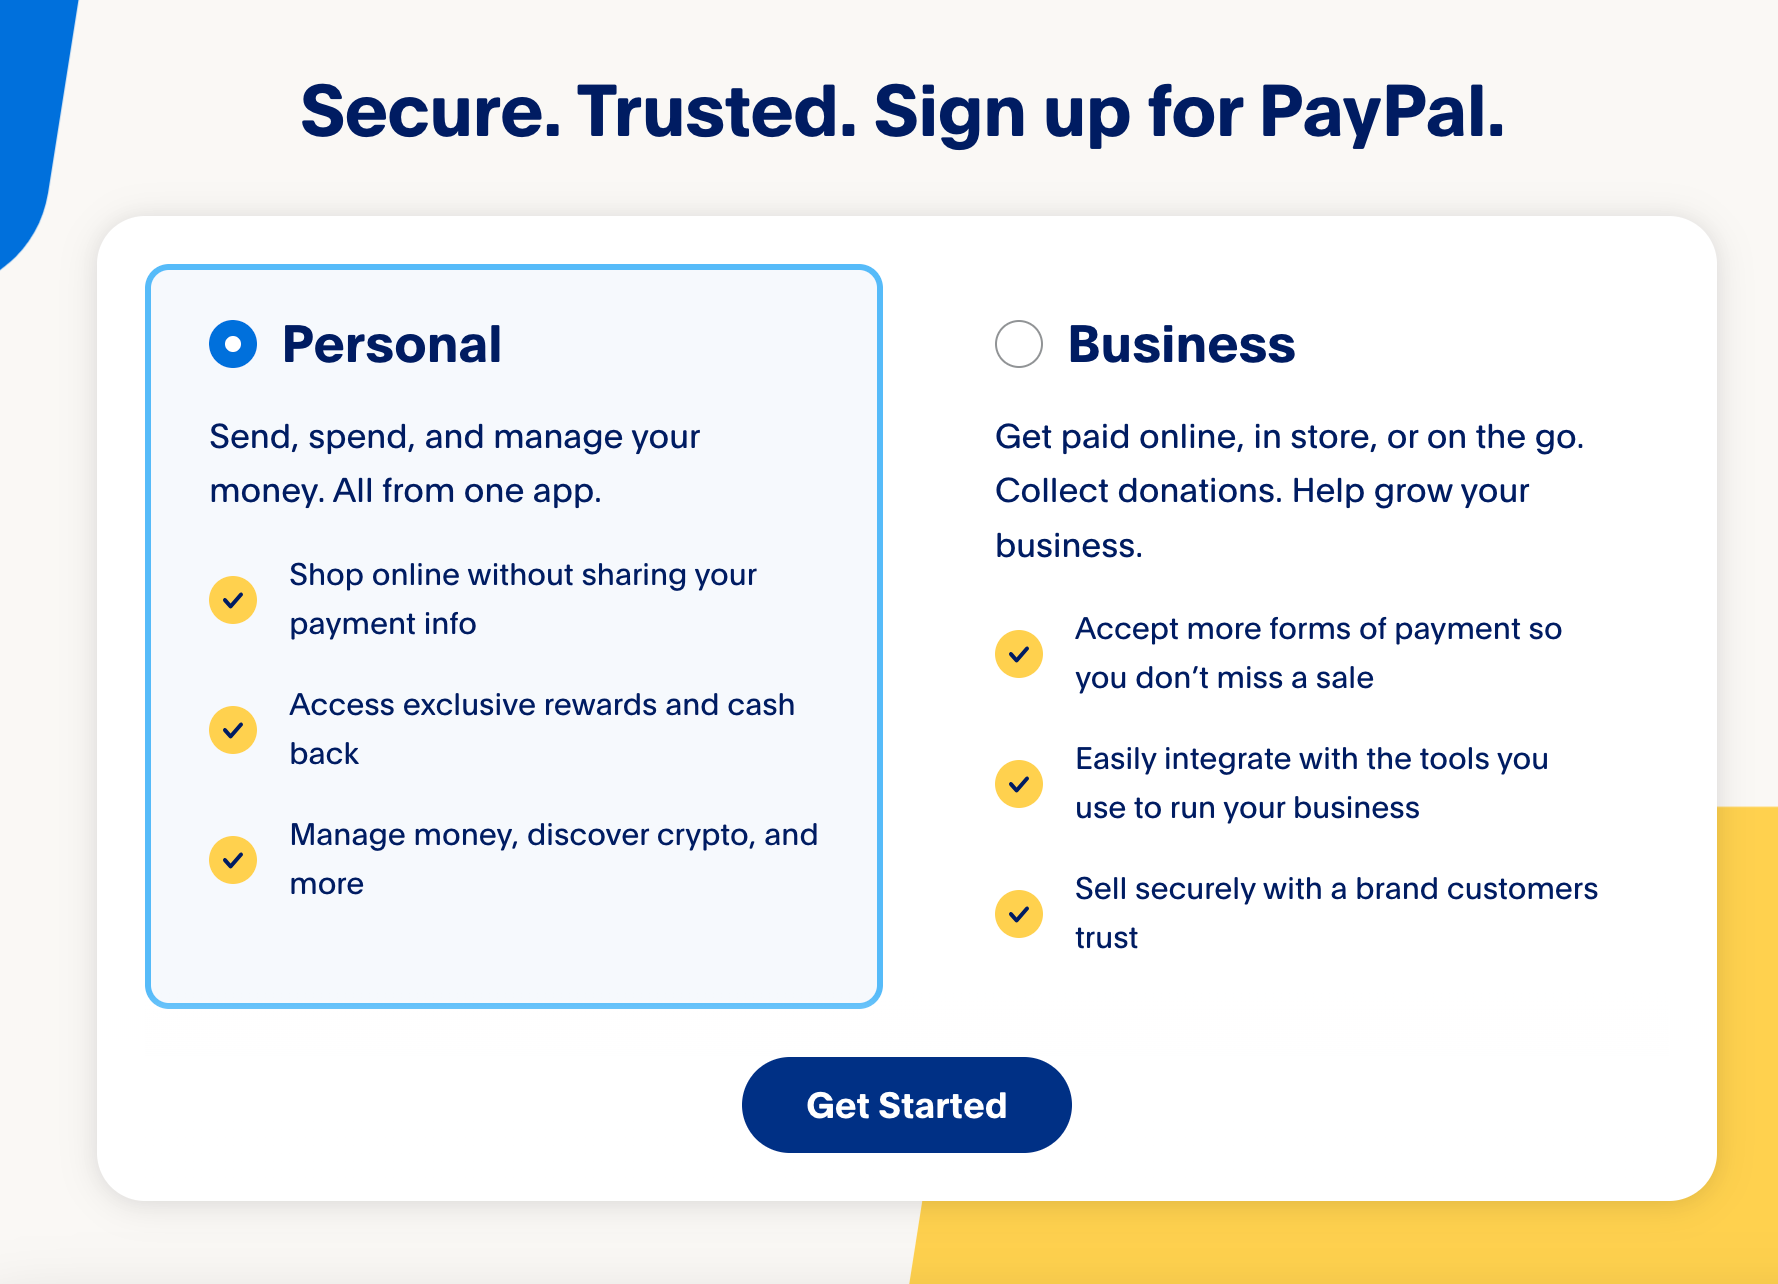 The PayPal account creation screen. The option to create a Personal account is selected, and a Get Started button is available for users who are ready to continue creating their account.